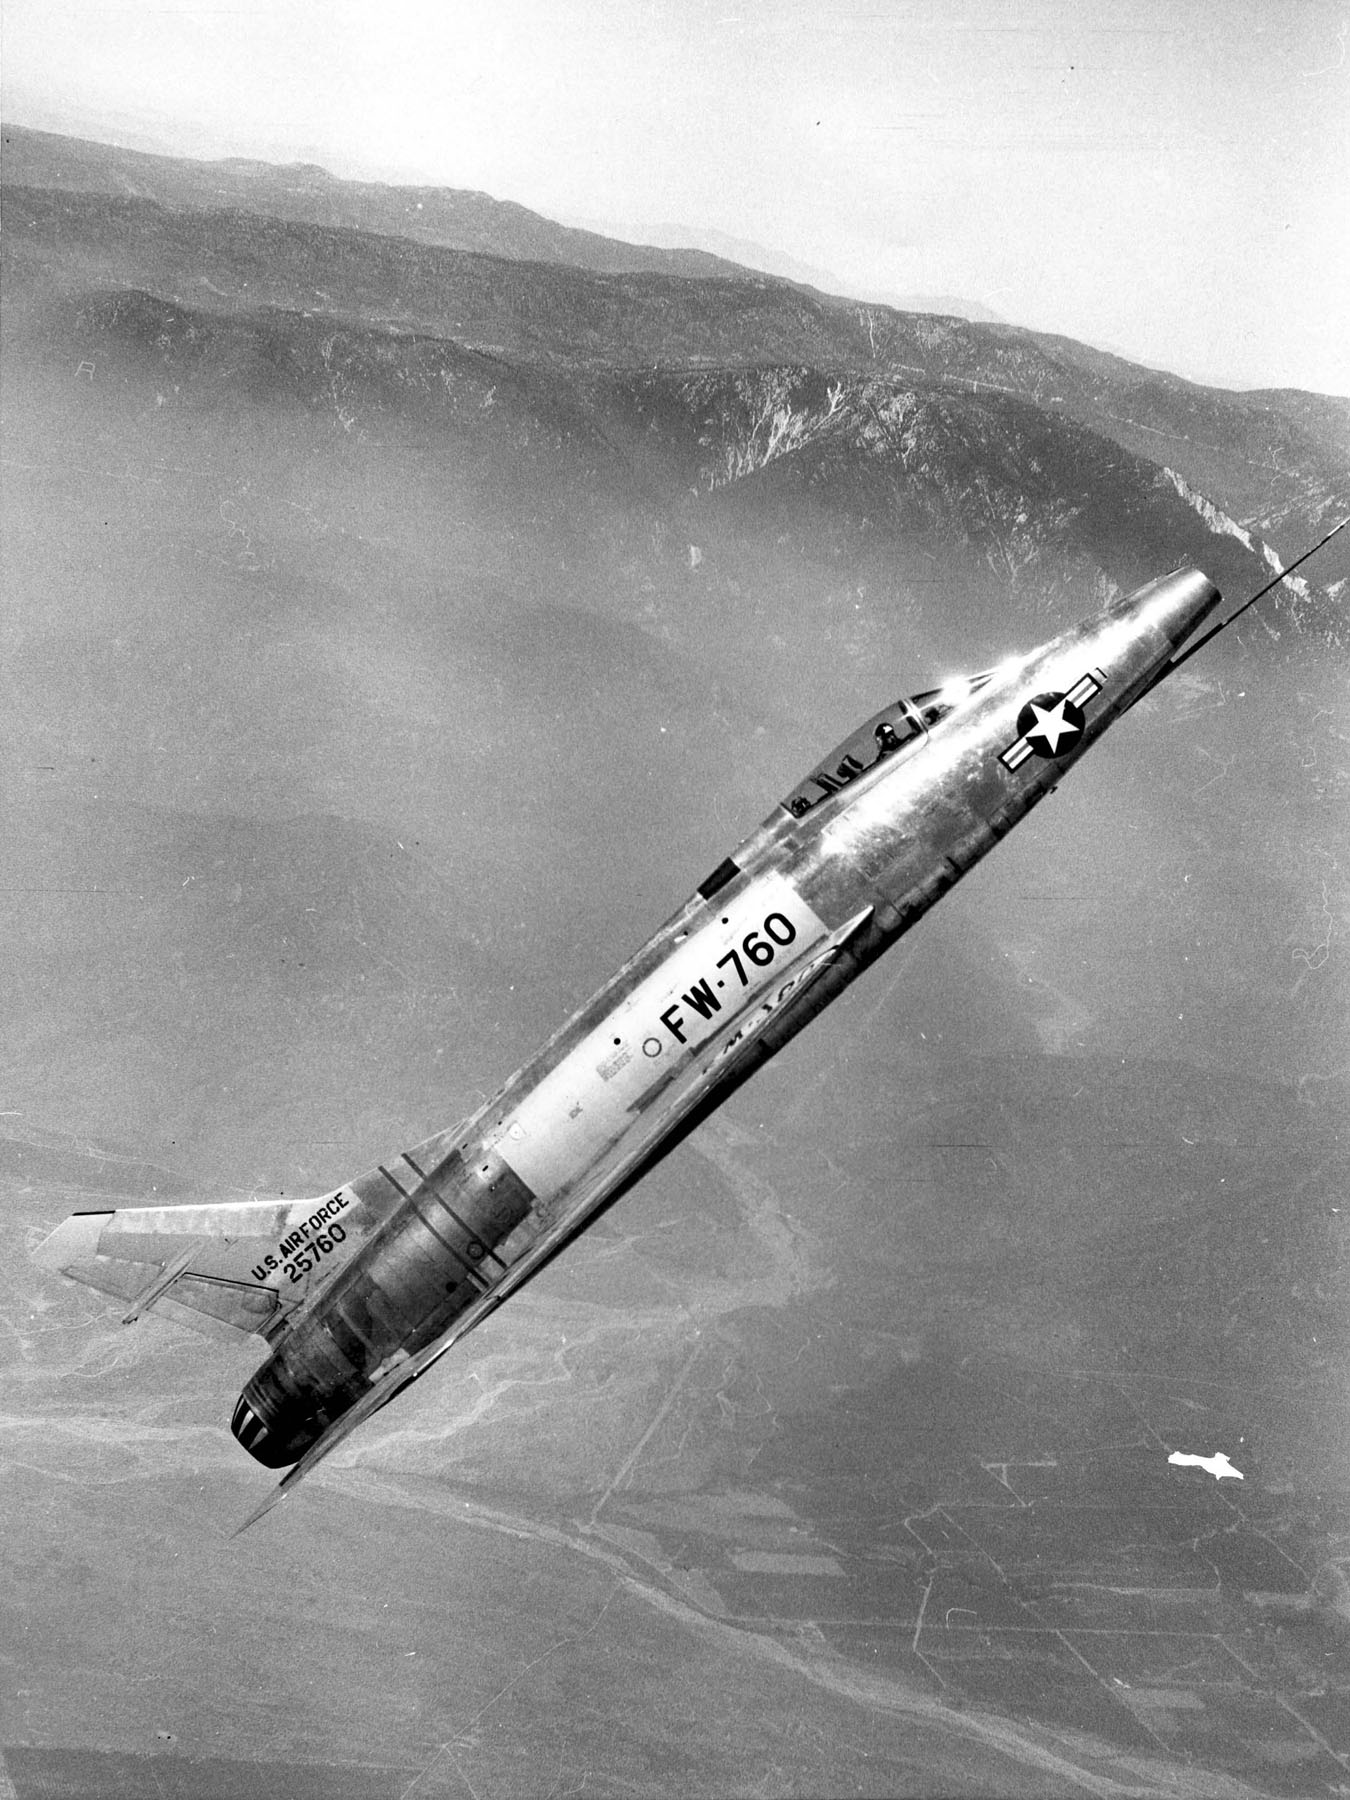 his is the fifth production F-100A-1-NA Super Sabre, 52-5760, in flight southeast of San Bernardino, California. This fighter is from the same production block as 52-5764, the fighter being tested by George Welch, 12 October 1954. In this photograph, FW-760 has the taller vertical fin that was designed to improve the Super Sabre's controlability. (U.S. Air Force)